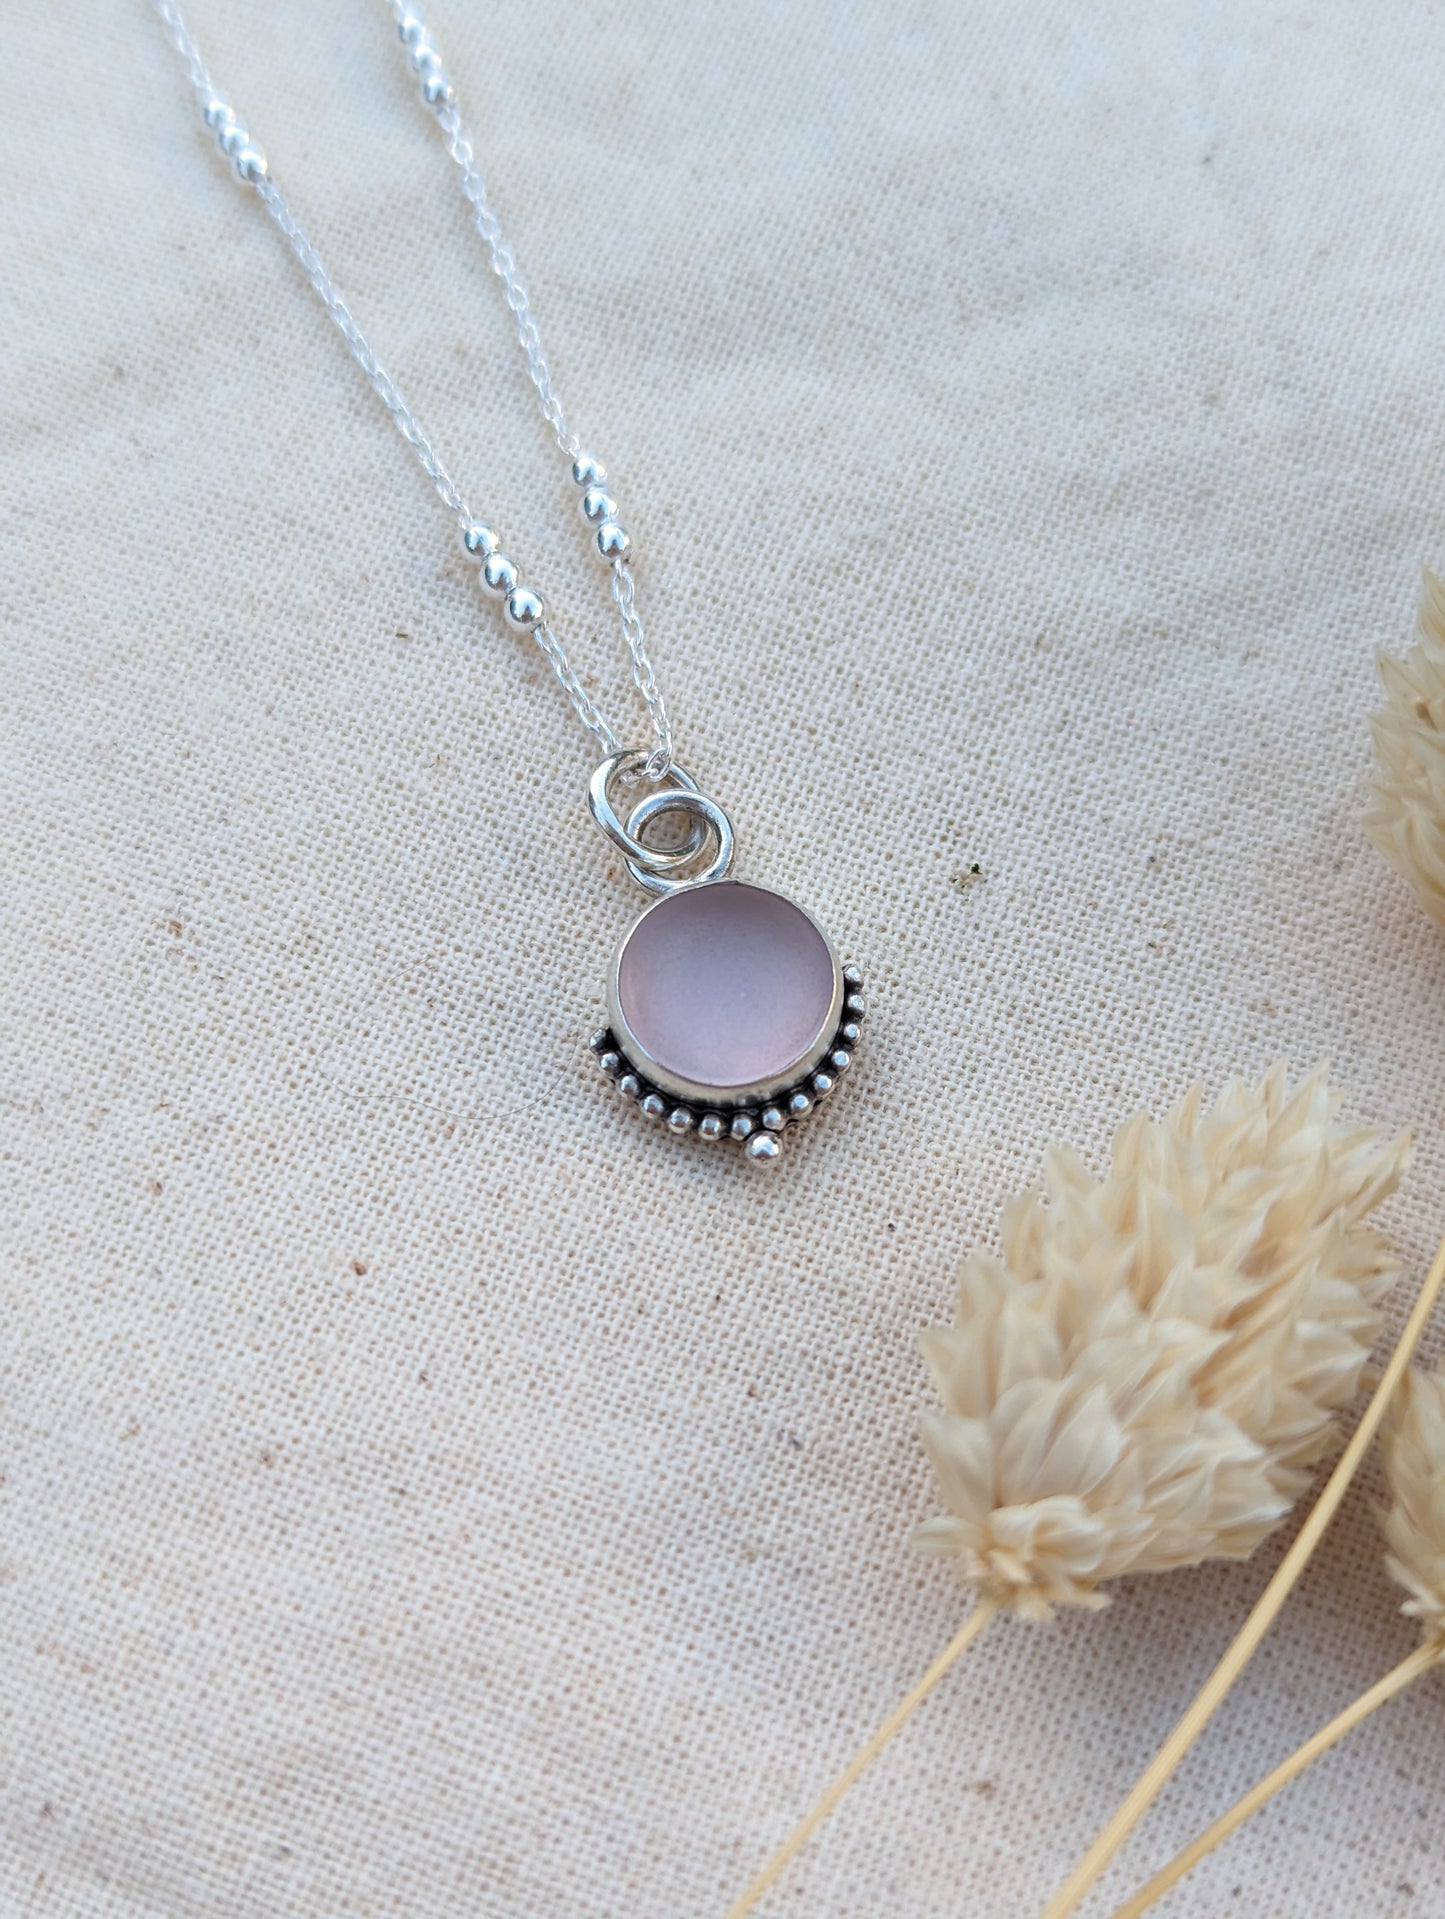 Blush pink seaglass necklace